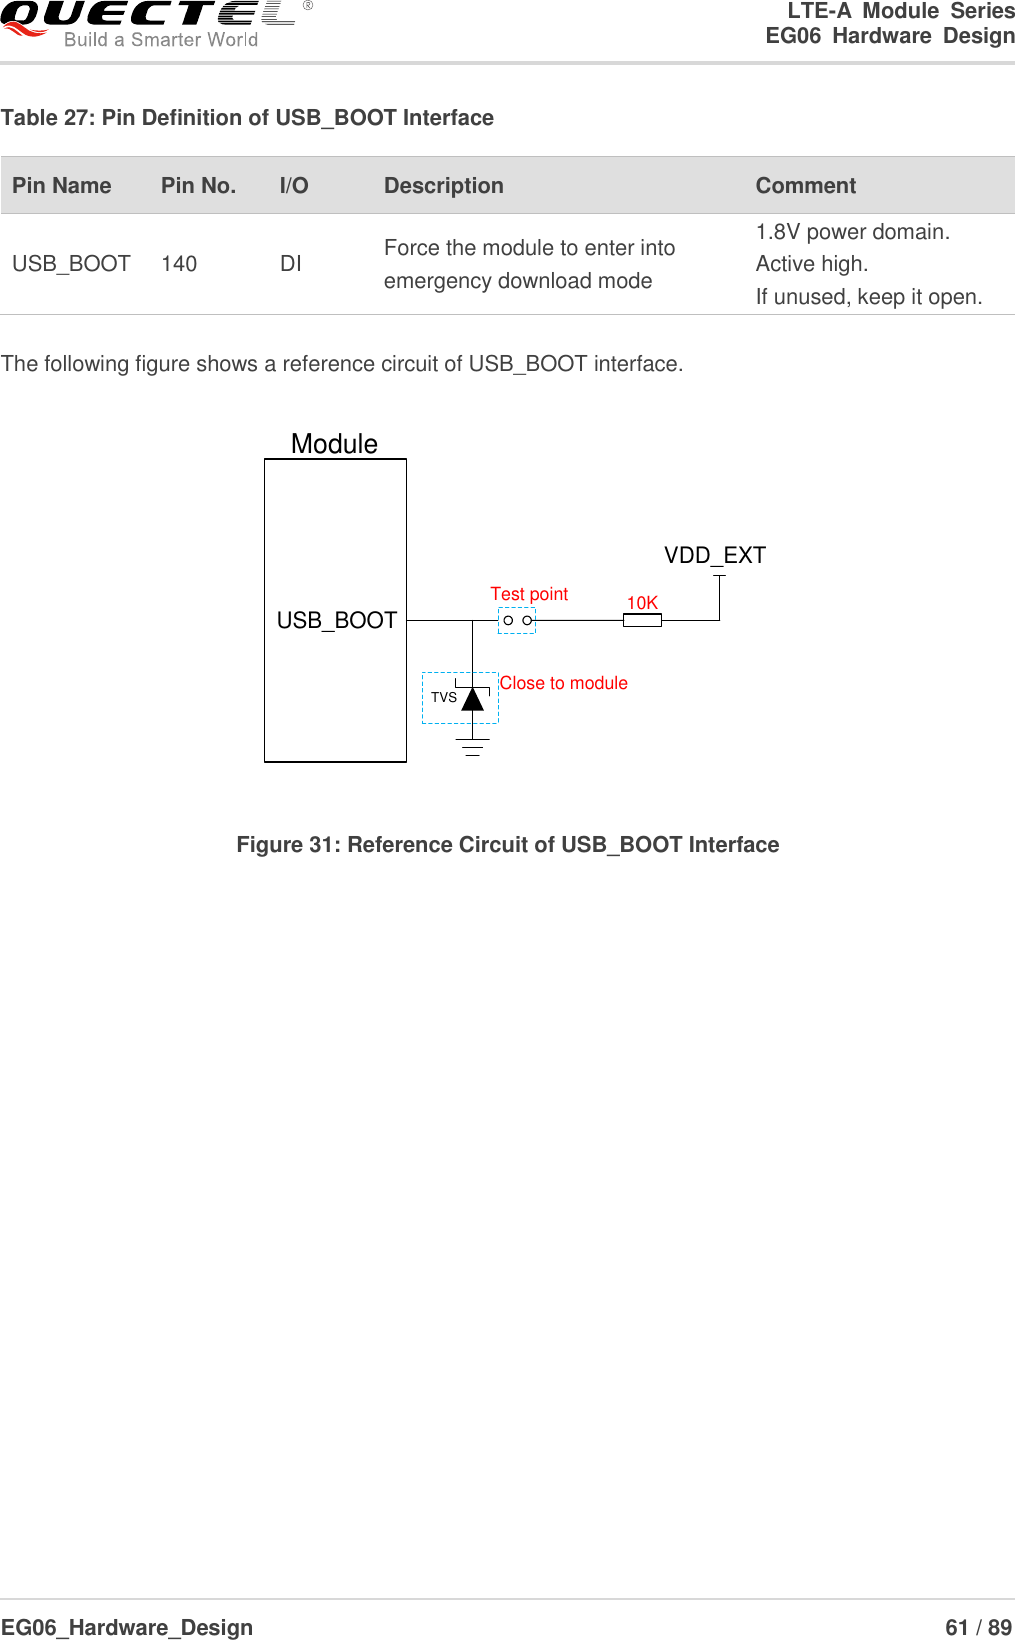 LTE-A  Module  Series                                                  EG06  Hardware  Design  EG06_Hardware_Design                                                               61 / 89    Table 27: Pin Definition of USB_BOOT Interface  The following figure shows a reference circuit of USB_BOOT interface. ModuleUSB_BOOTVDD_EXT10KTest pointTVS Close to module Figure 31: Reference Circuit of USB_BOOT Interface Pin Name   Pin No. I/O Description   Comment USB_BOOT 140 DI Force the module to enter into emergency download mode 1.8V power domain. Active high. If unused, keep it open. 